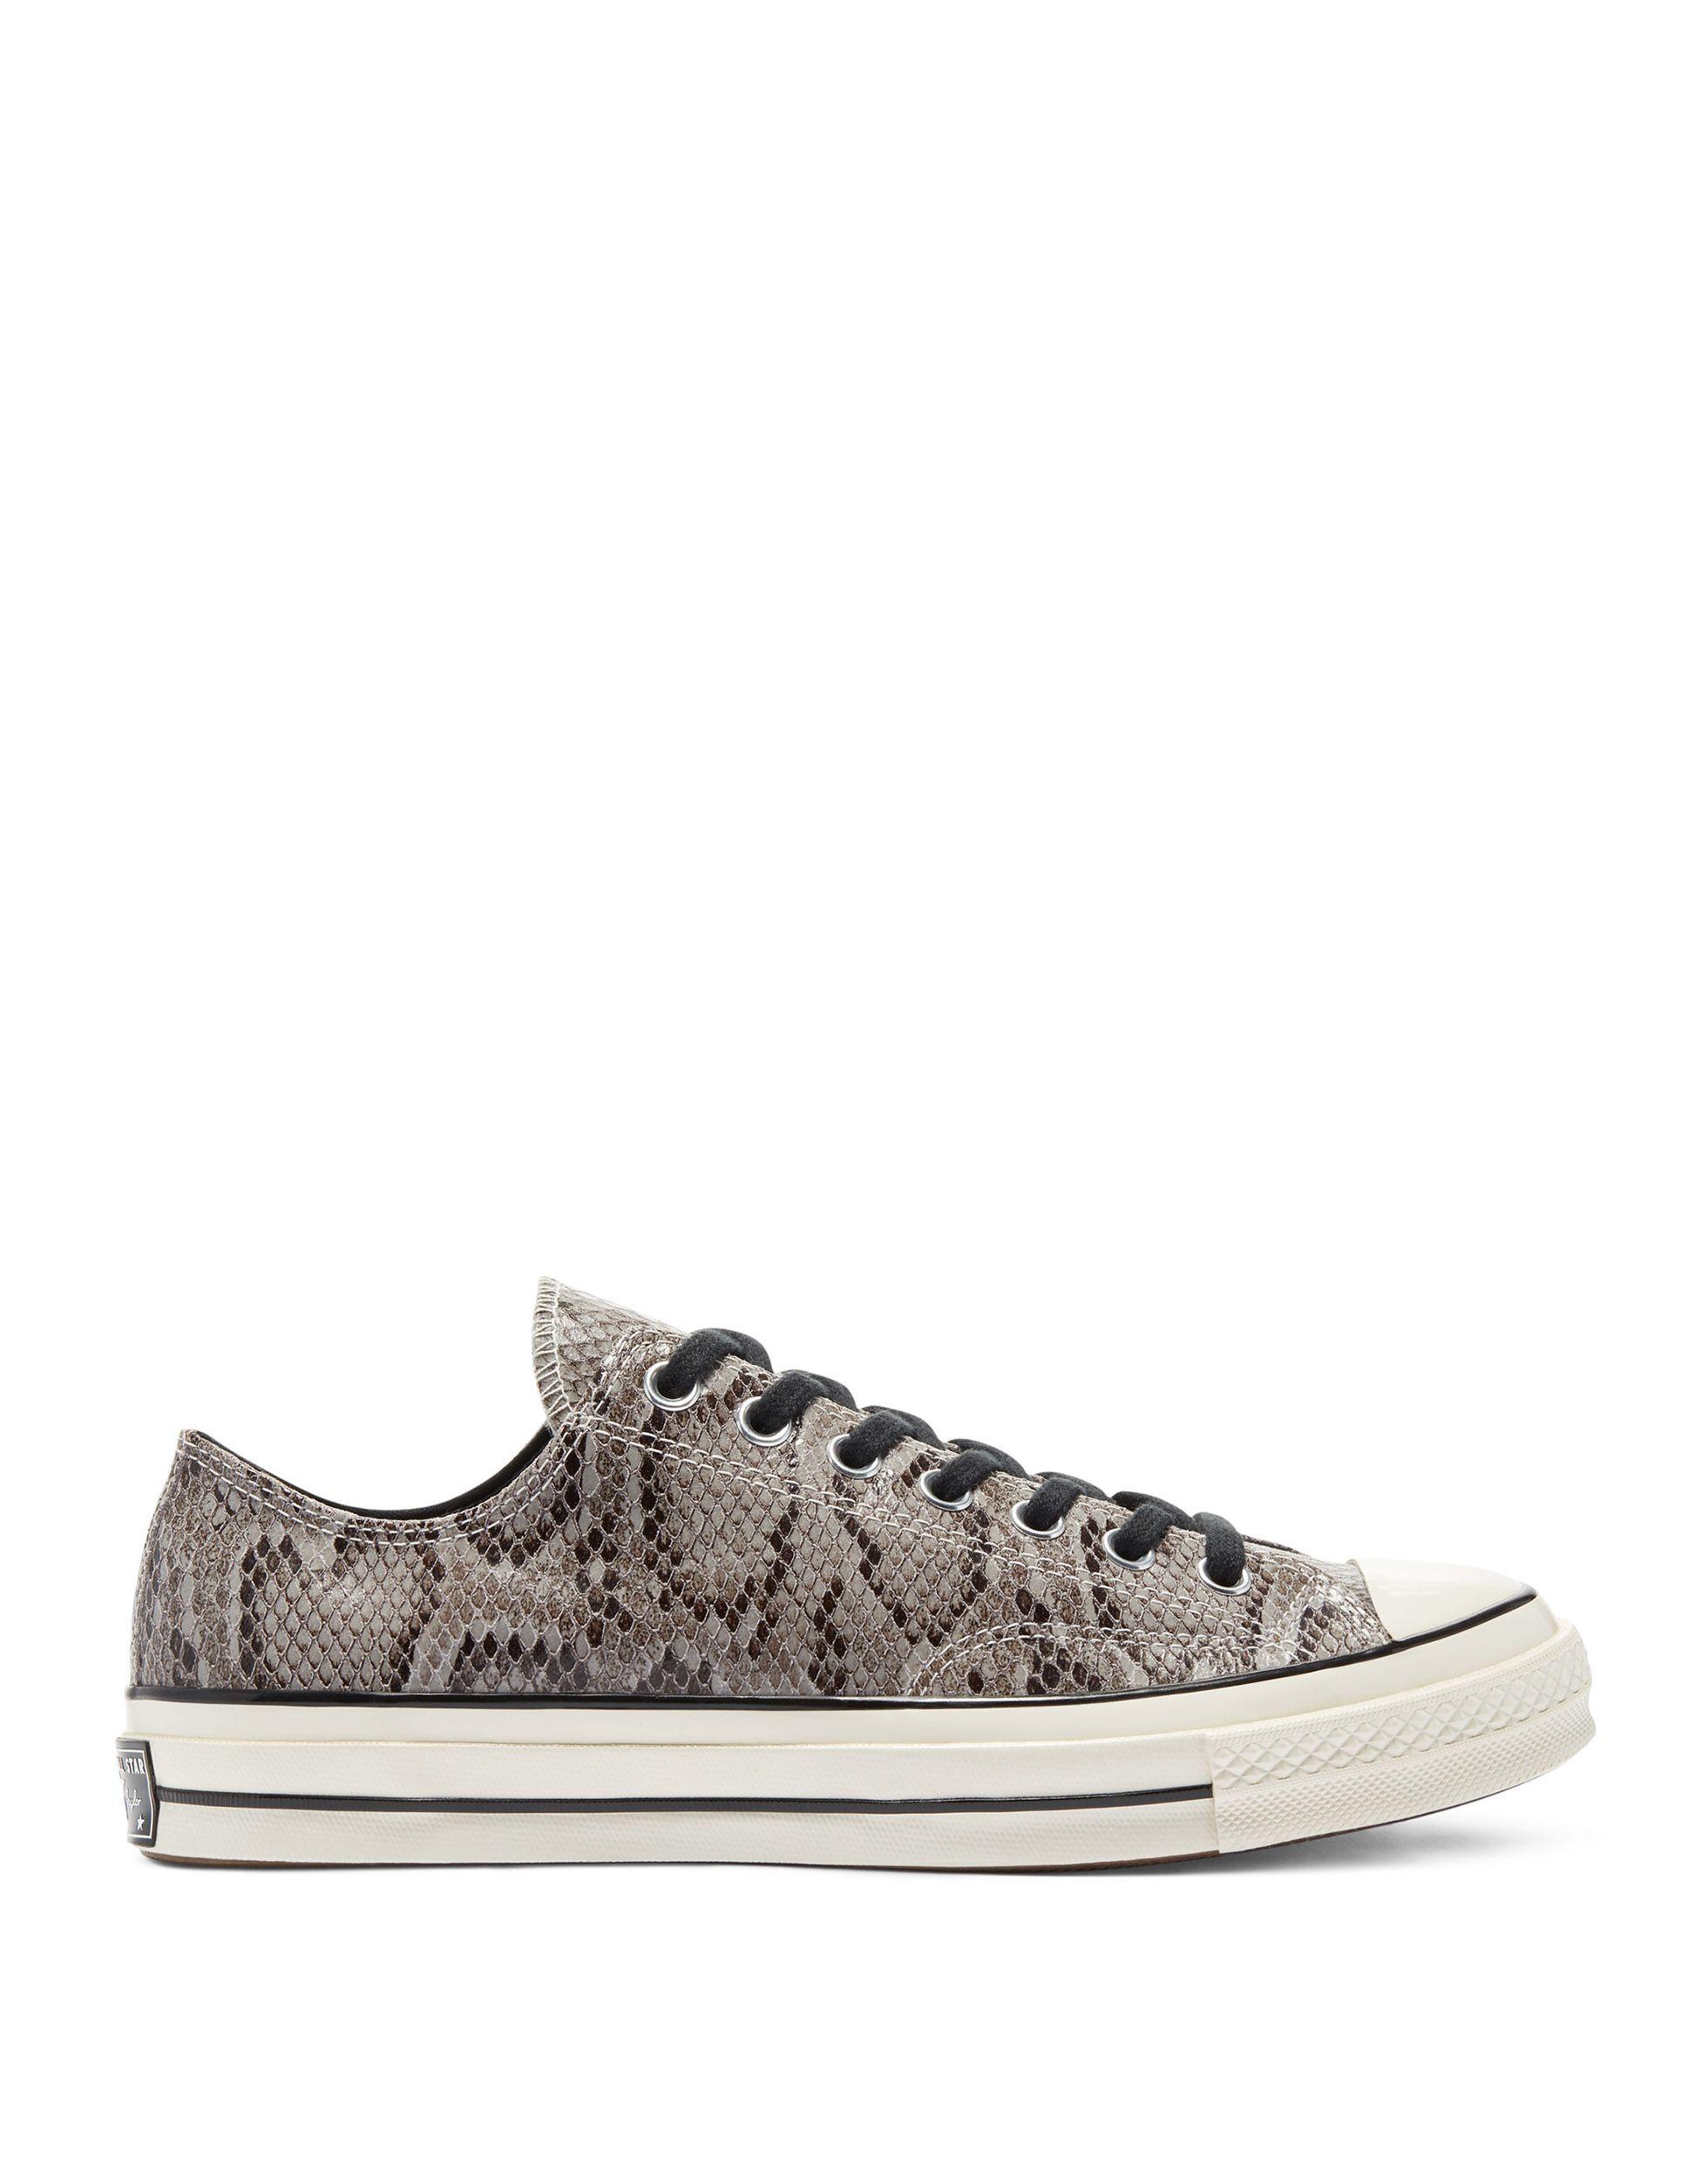 Converse Chuck 70 Low Archive Reptile Snake Print Leather Sneakers in Gray  | Lyst